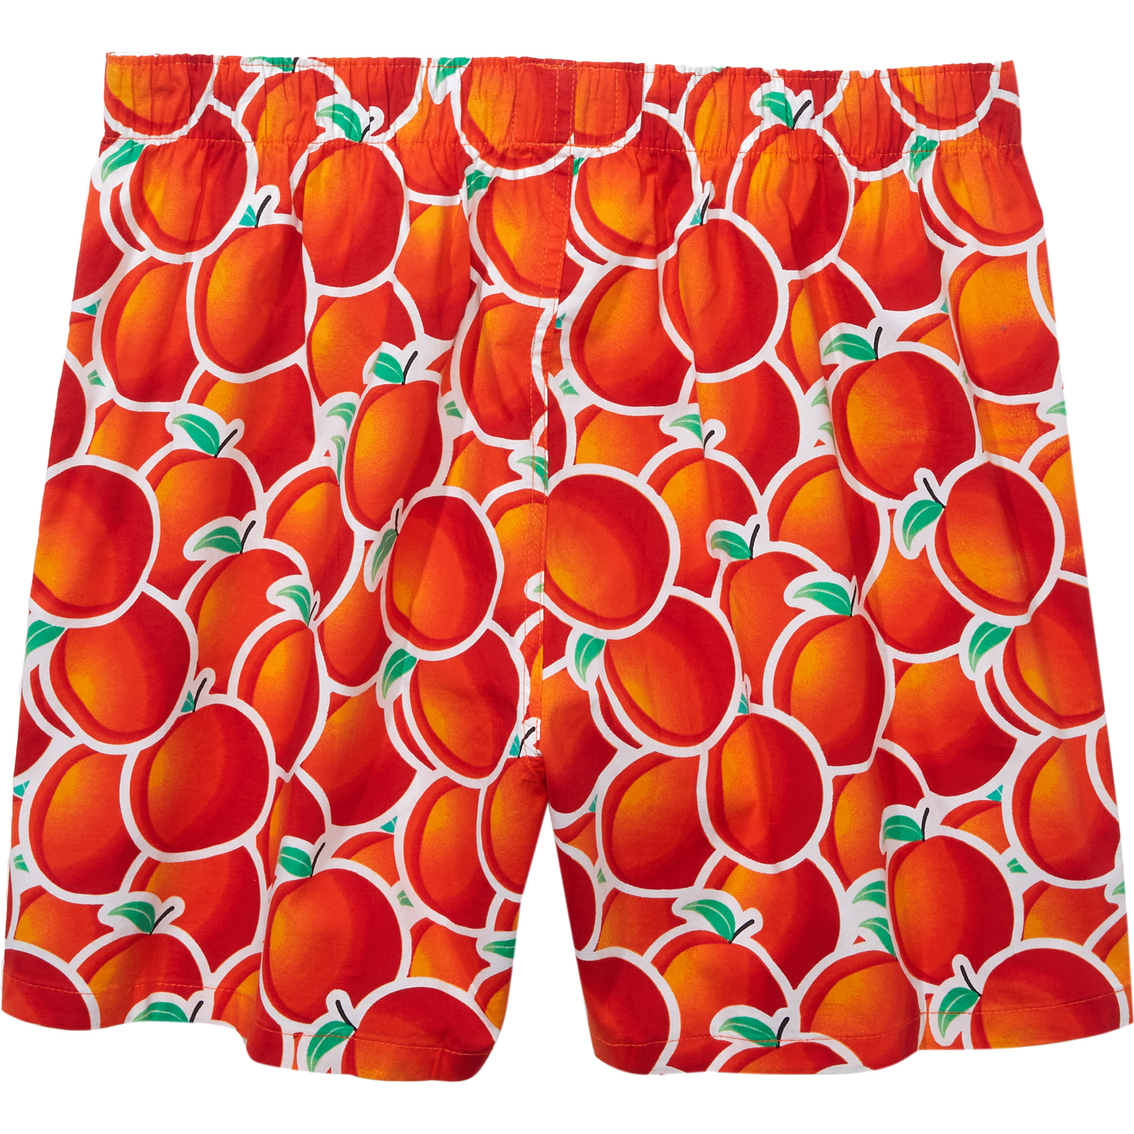 American Eagle AEO Peaches Stretch Boxer Shorts - Image 4 of 4